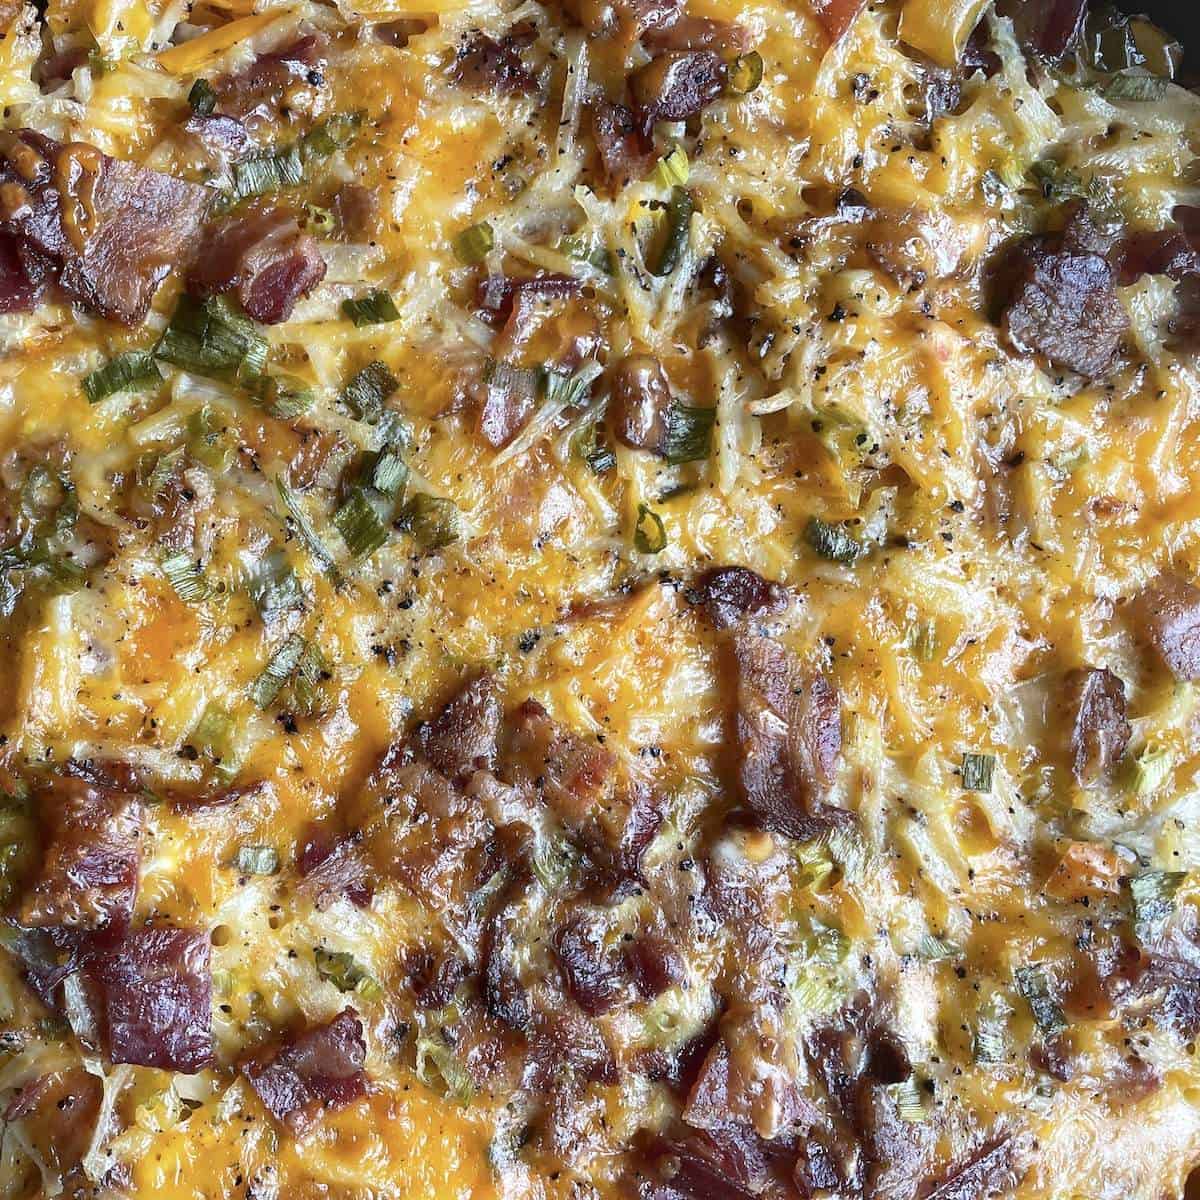 A zoomed in image of hash brown casserole with bacon.